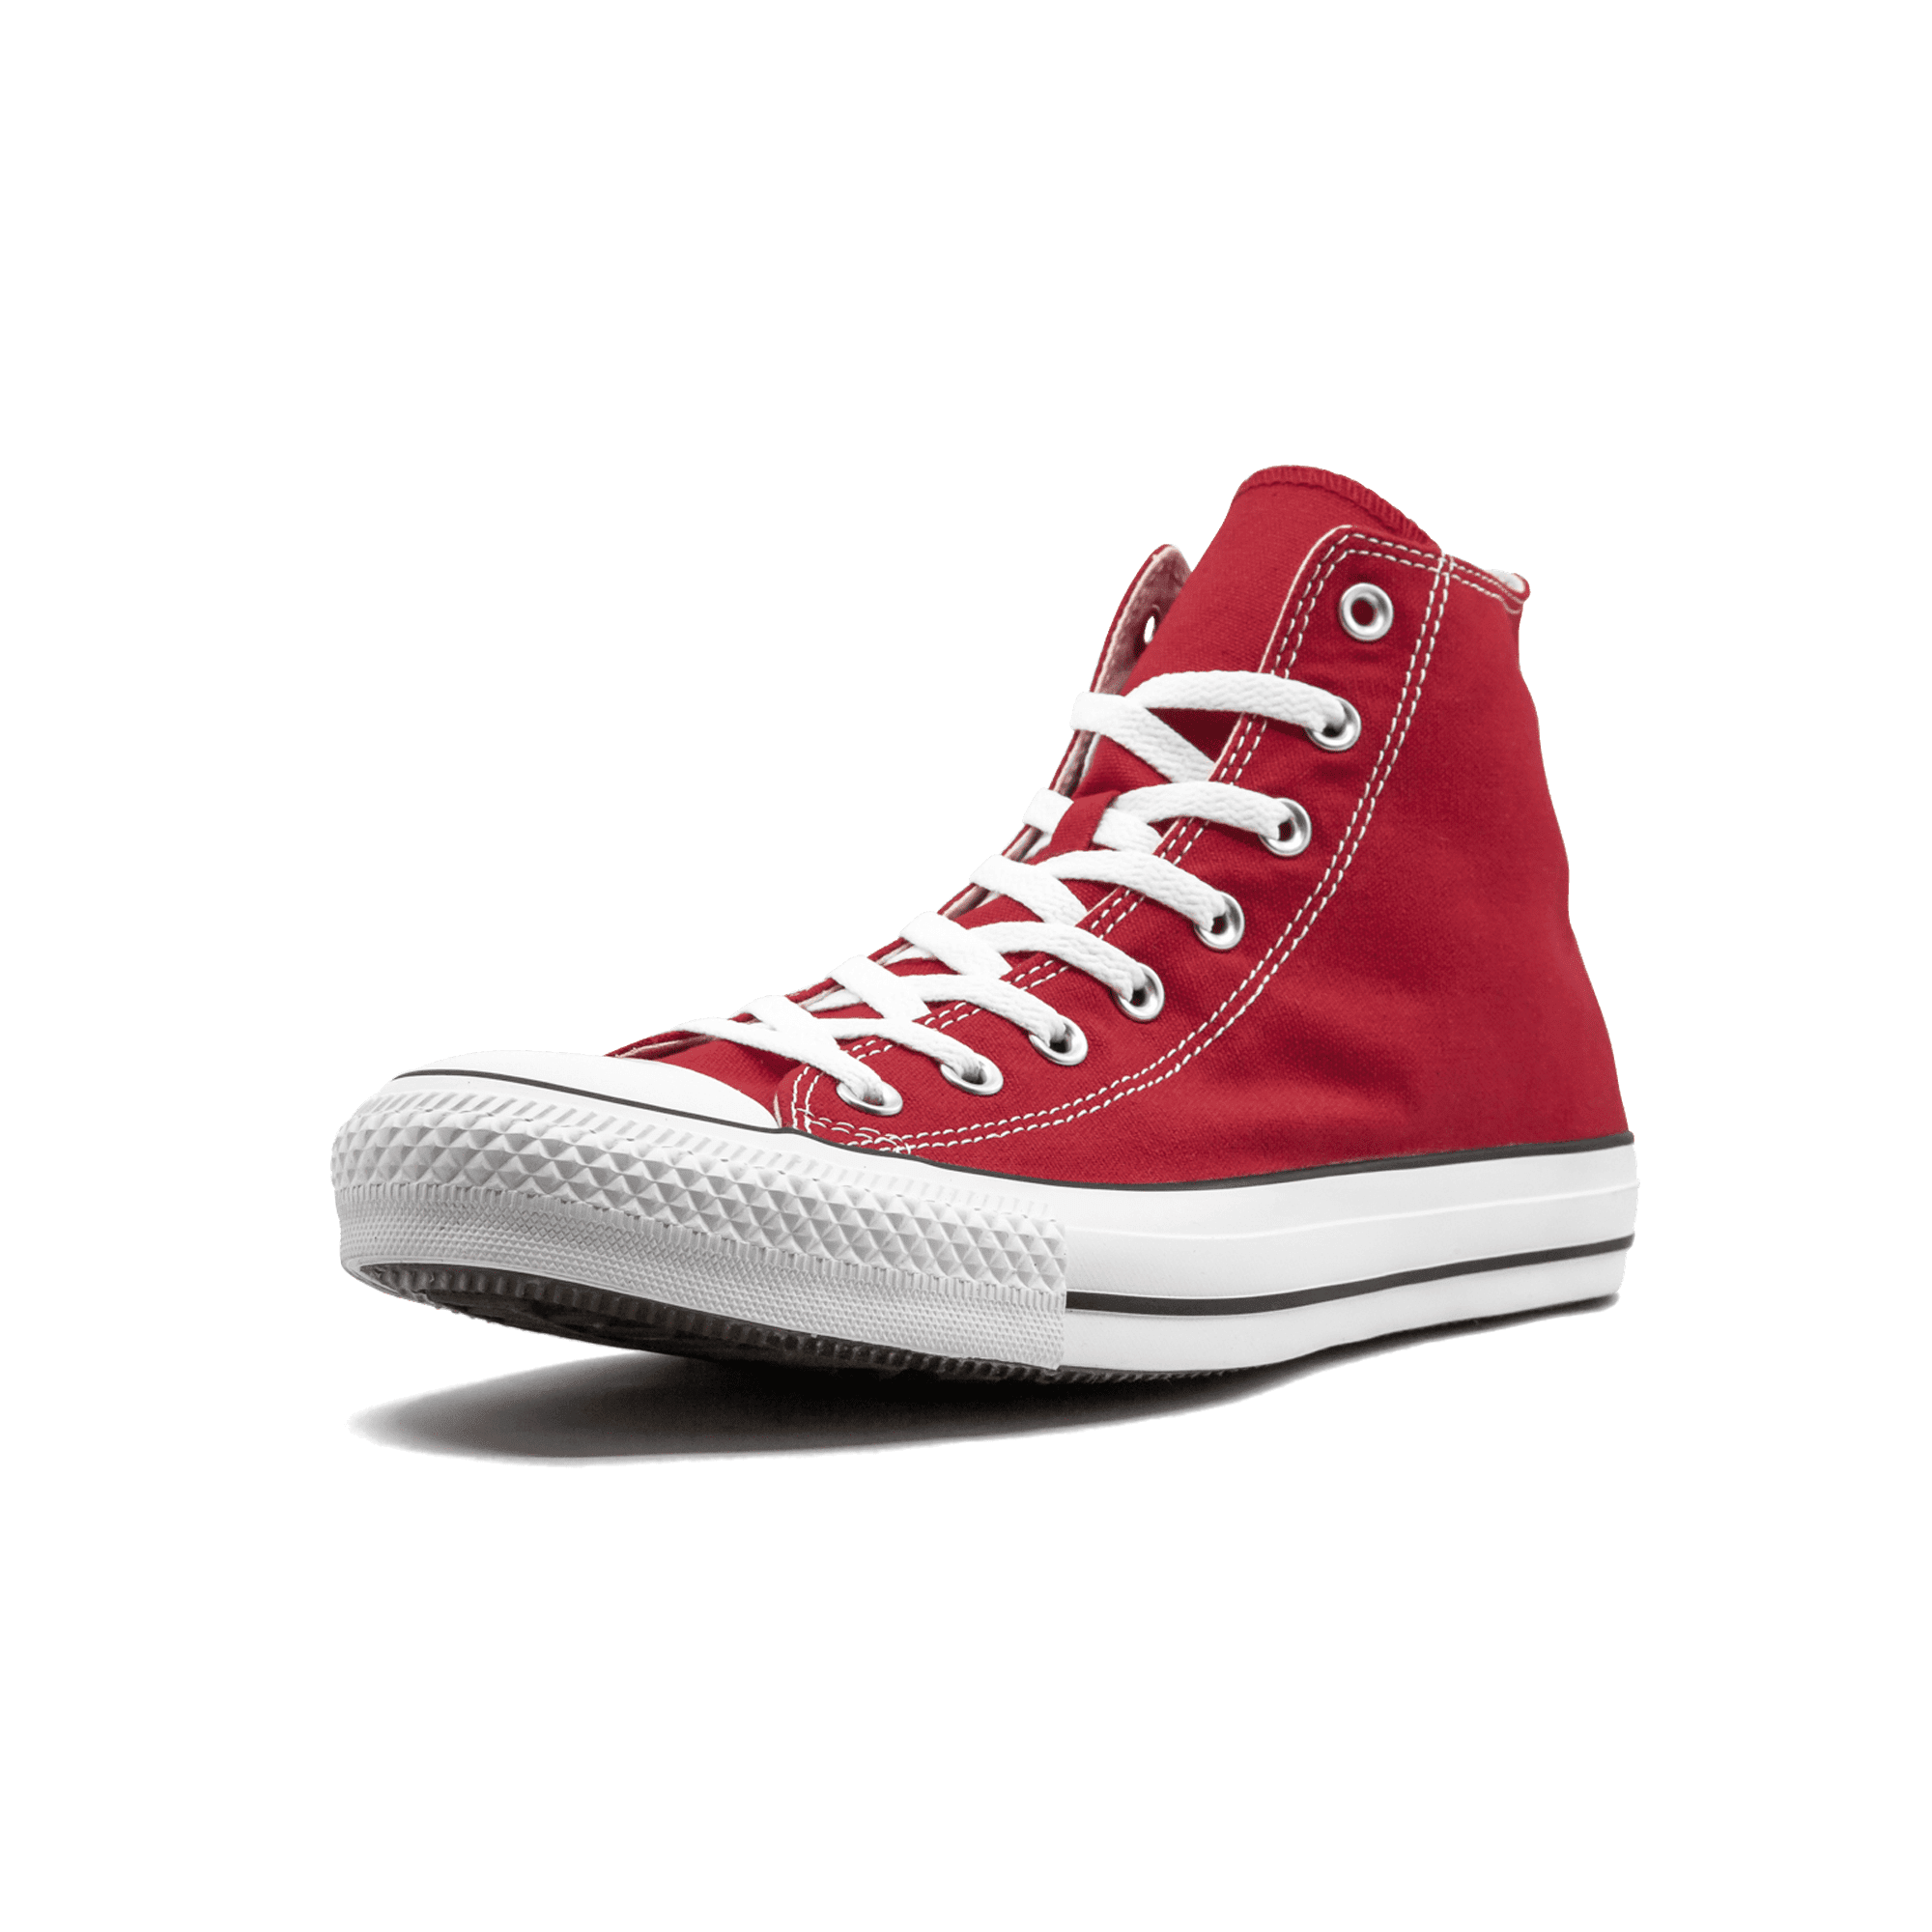 Converse Chuck Taylor All Star Hi  “Red” - Manore Store